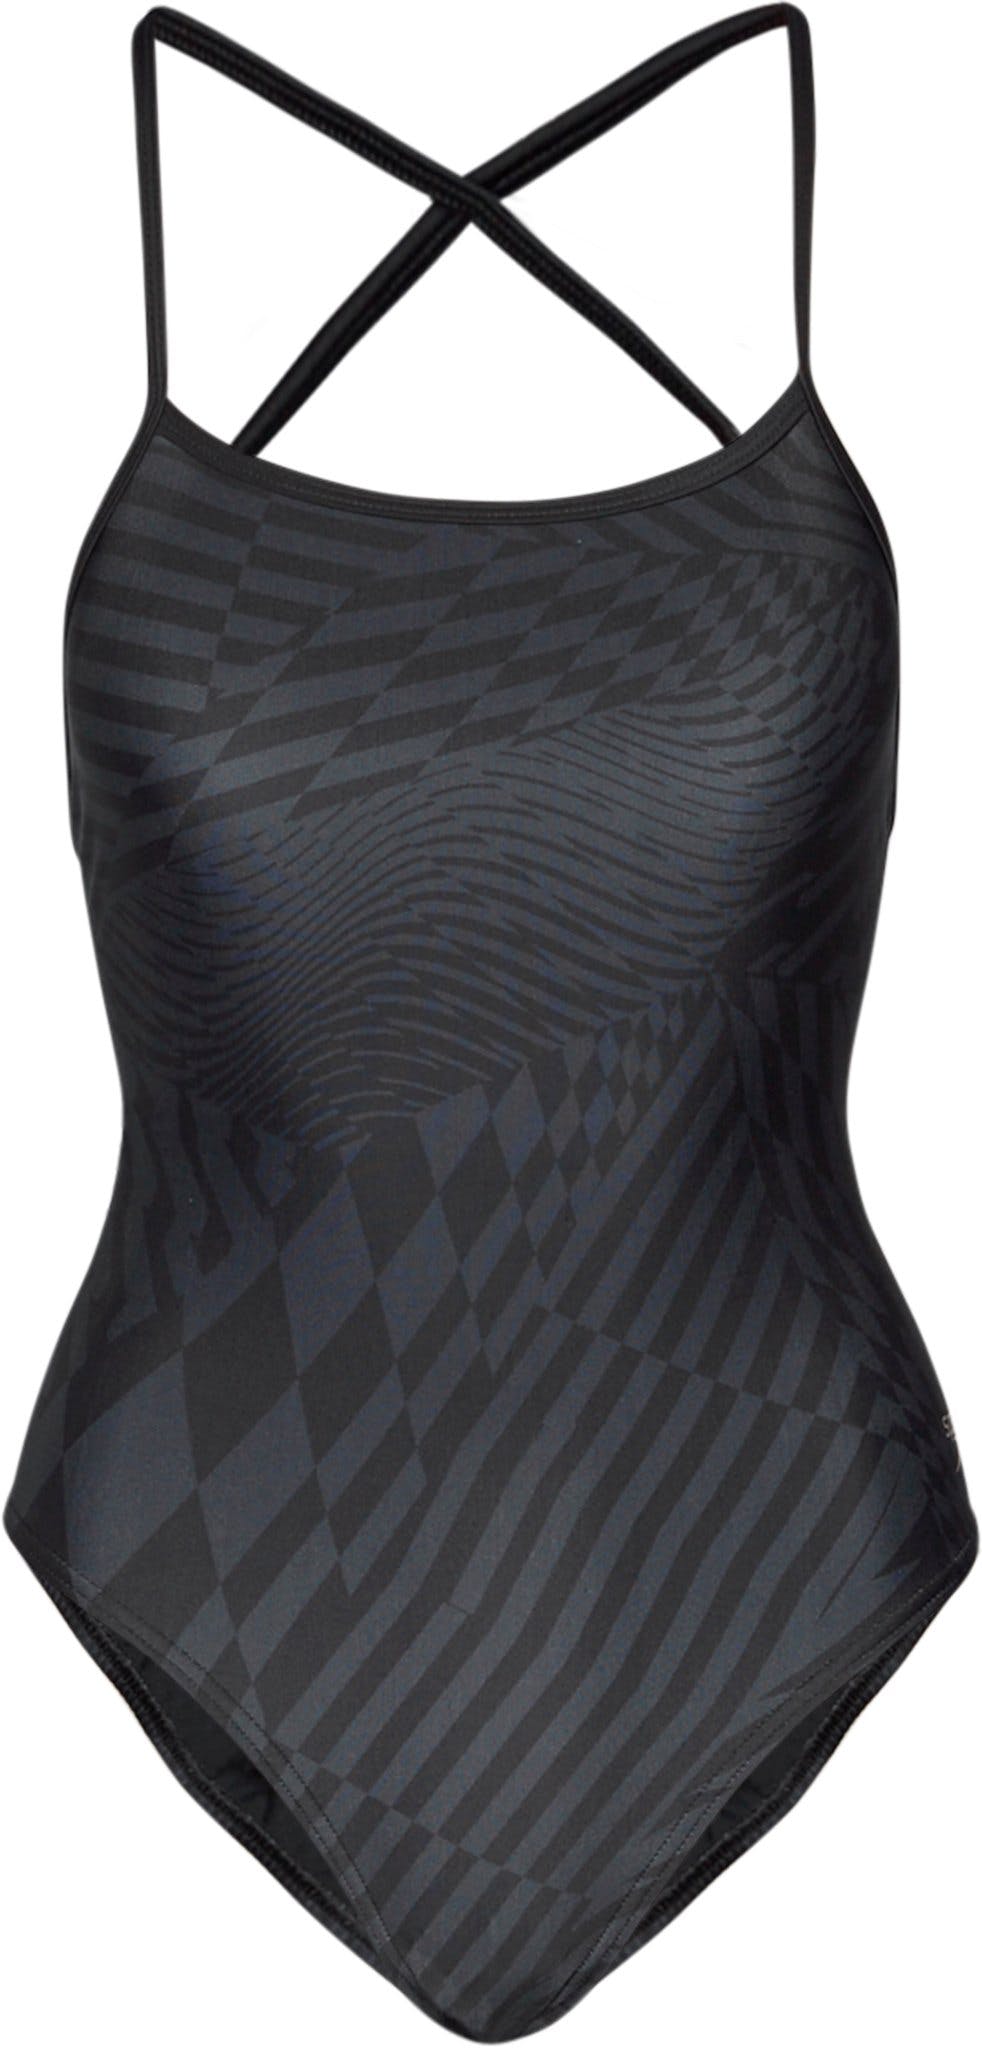 Product image for Printed Double X Back One Piece Swimsuit - Women's